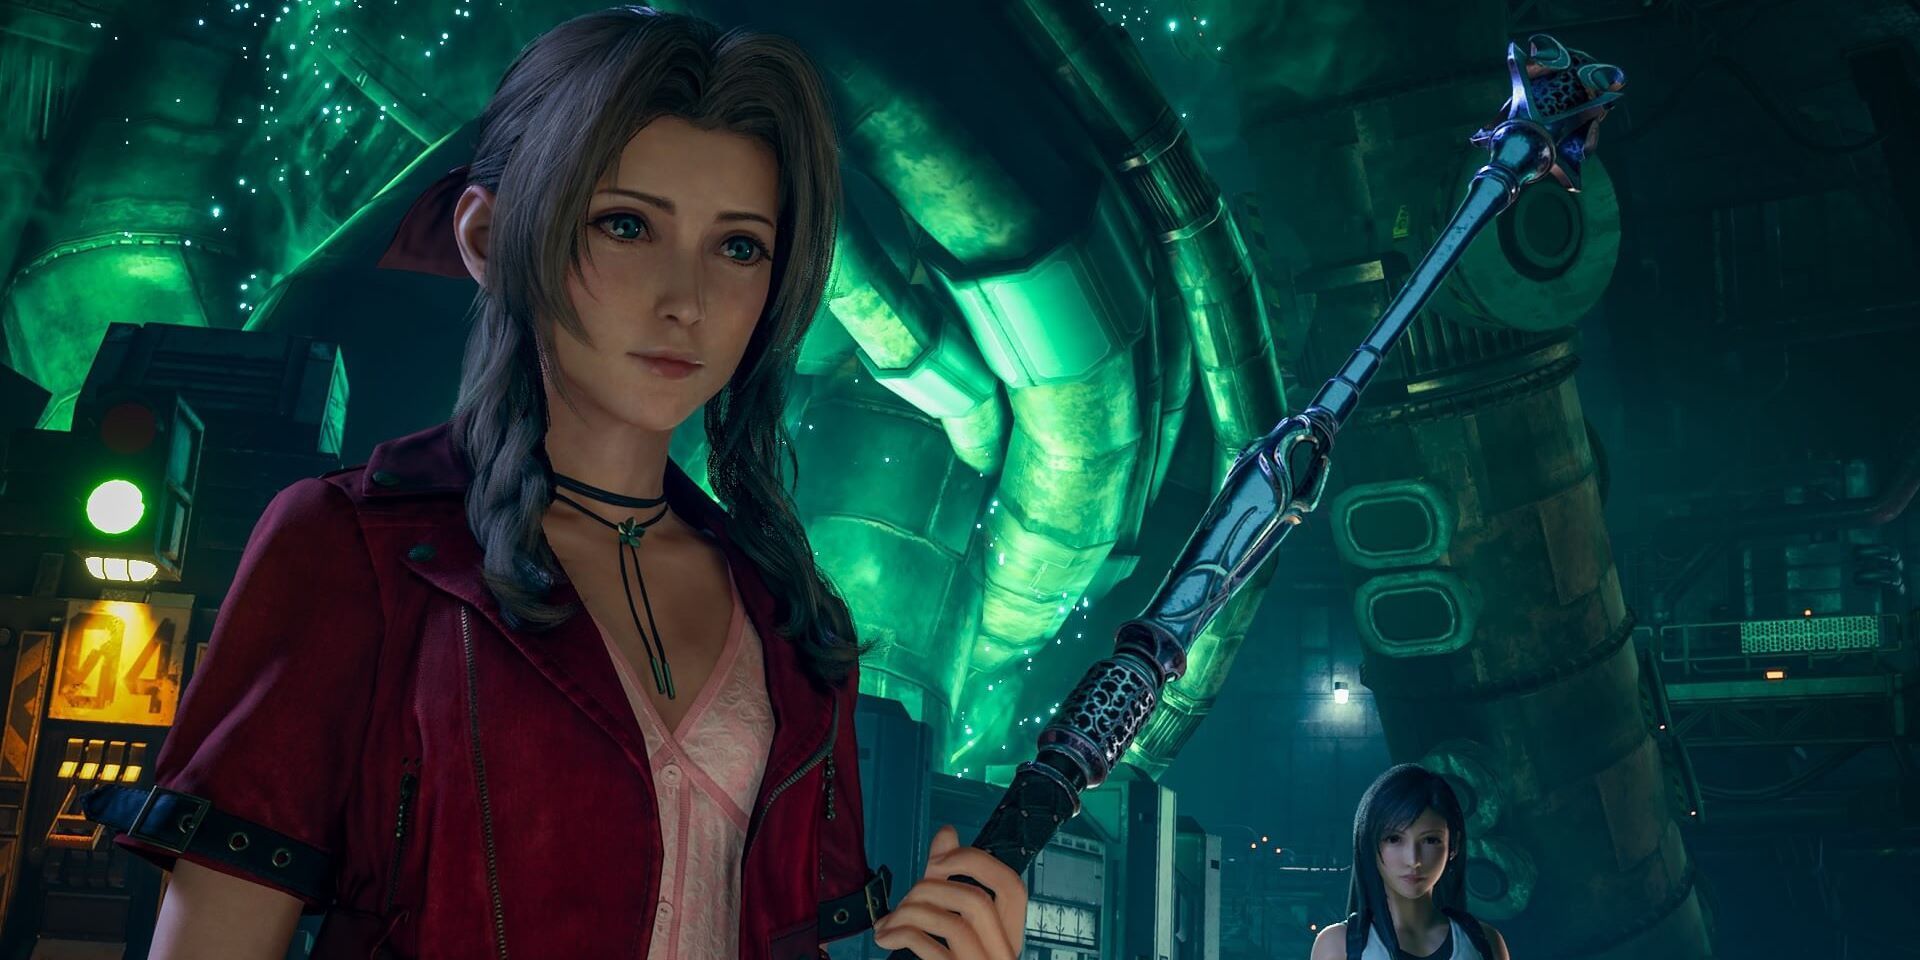 Final Fantasy 7 Remake Part 2 should get a reveal later this year